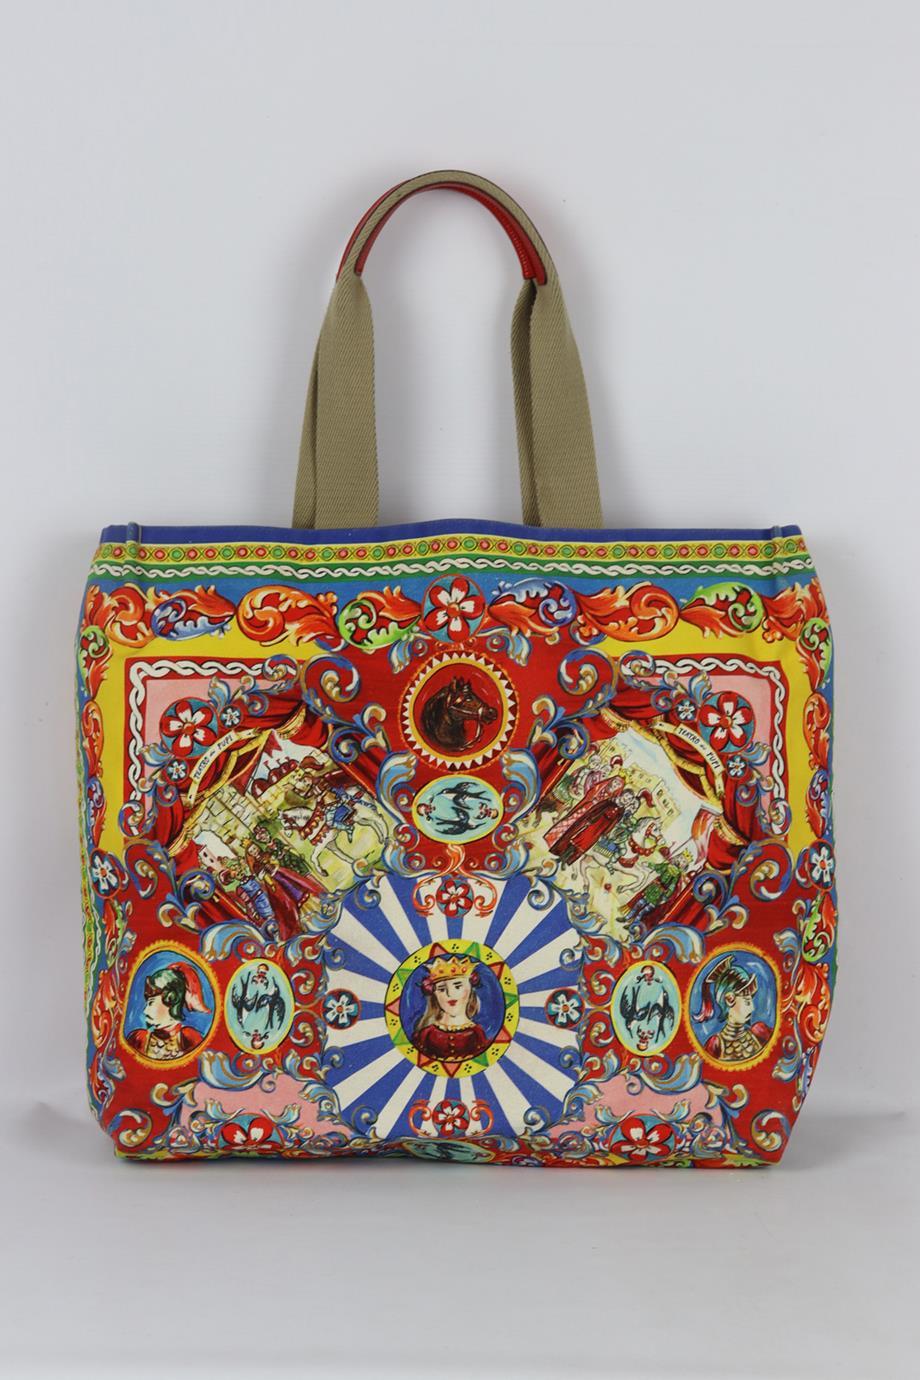 Dolce And Gabbana Maria Printed Canvas Tote Bag. Multi. Open Top. Does not come with - dustbag or box. 60% polyamide, 30% polyurethane, 5% leather, 3% rubber, 2% cork. Height: 16 in. Width: 4.2 in. Depth: 15 in. Handle drop: 8 in. Condition: Used.